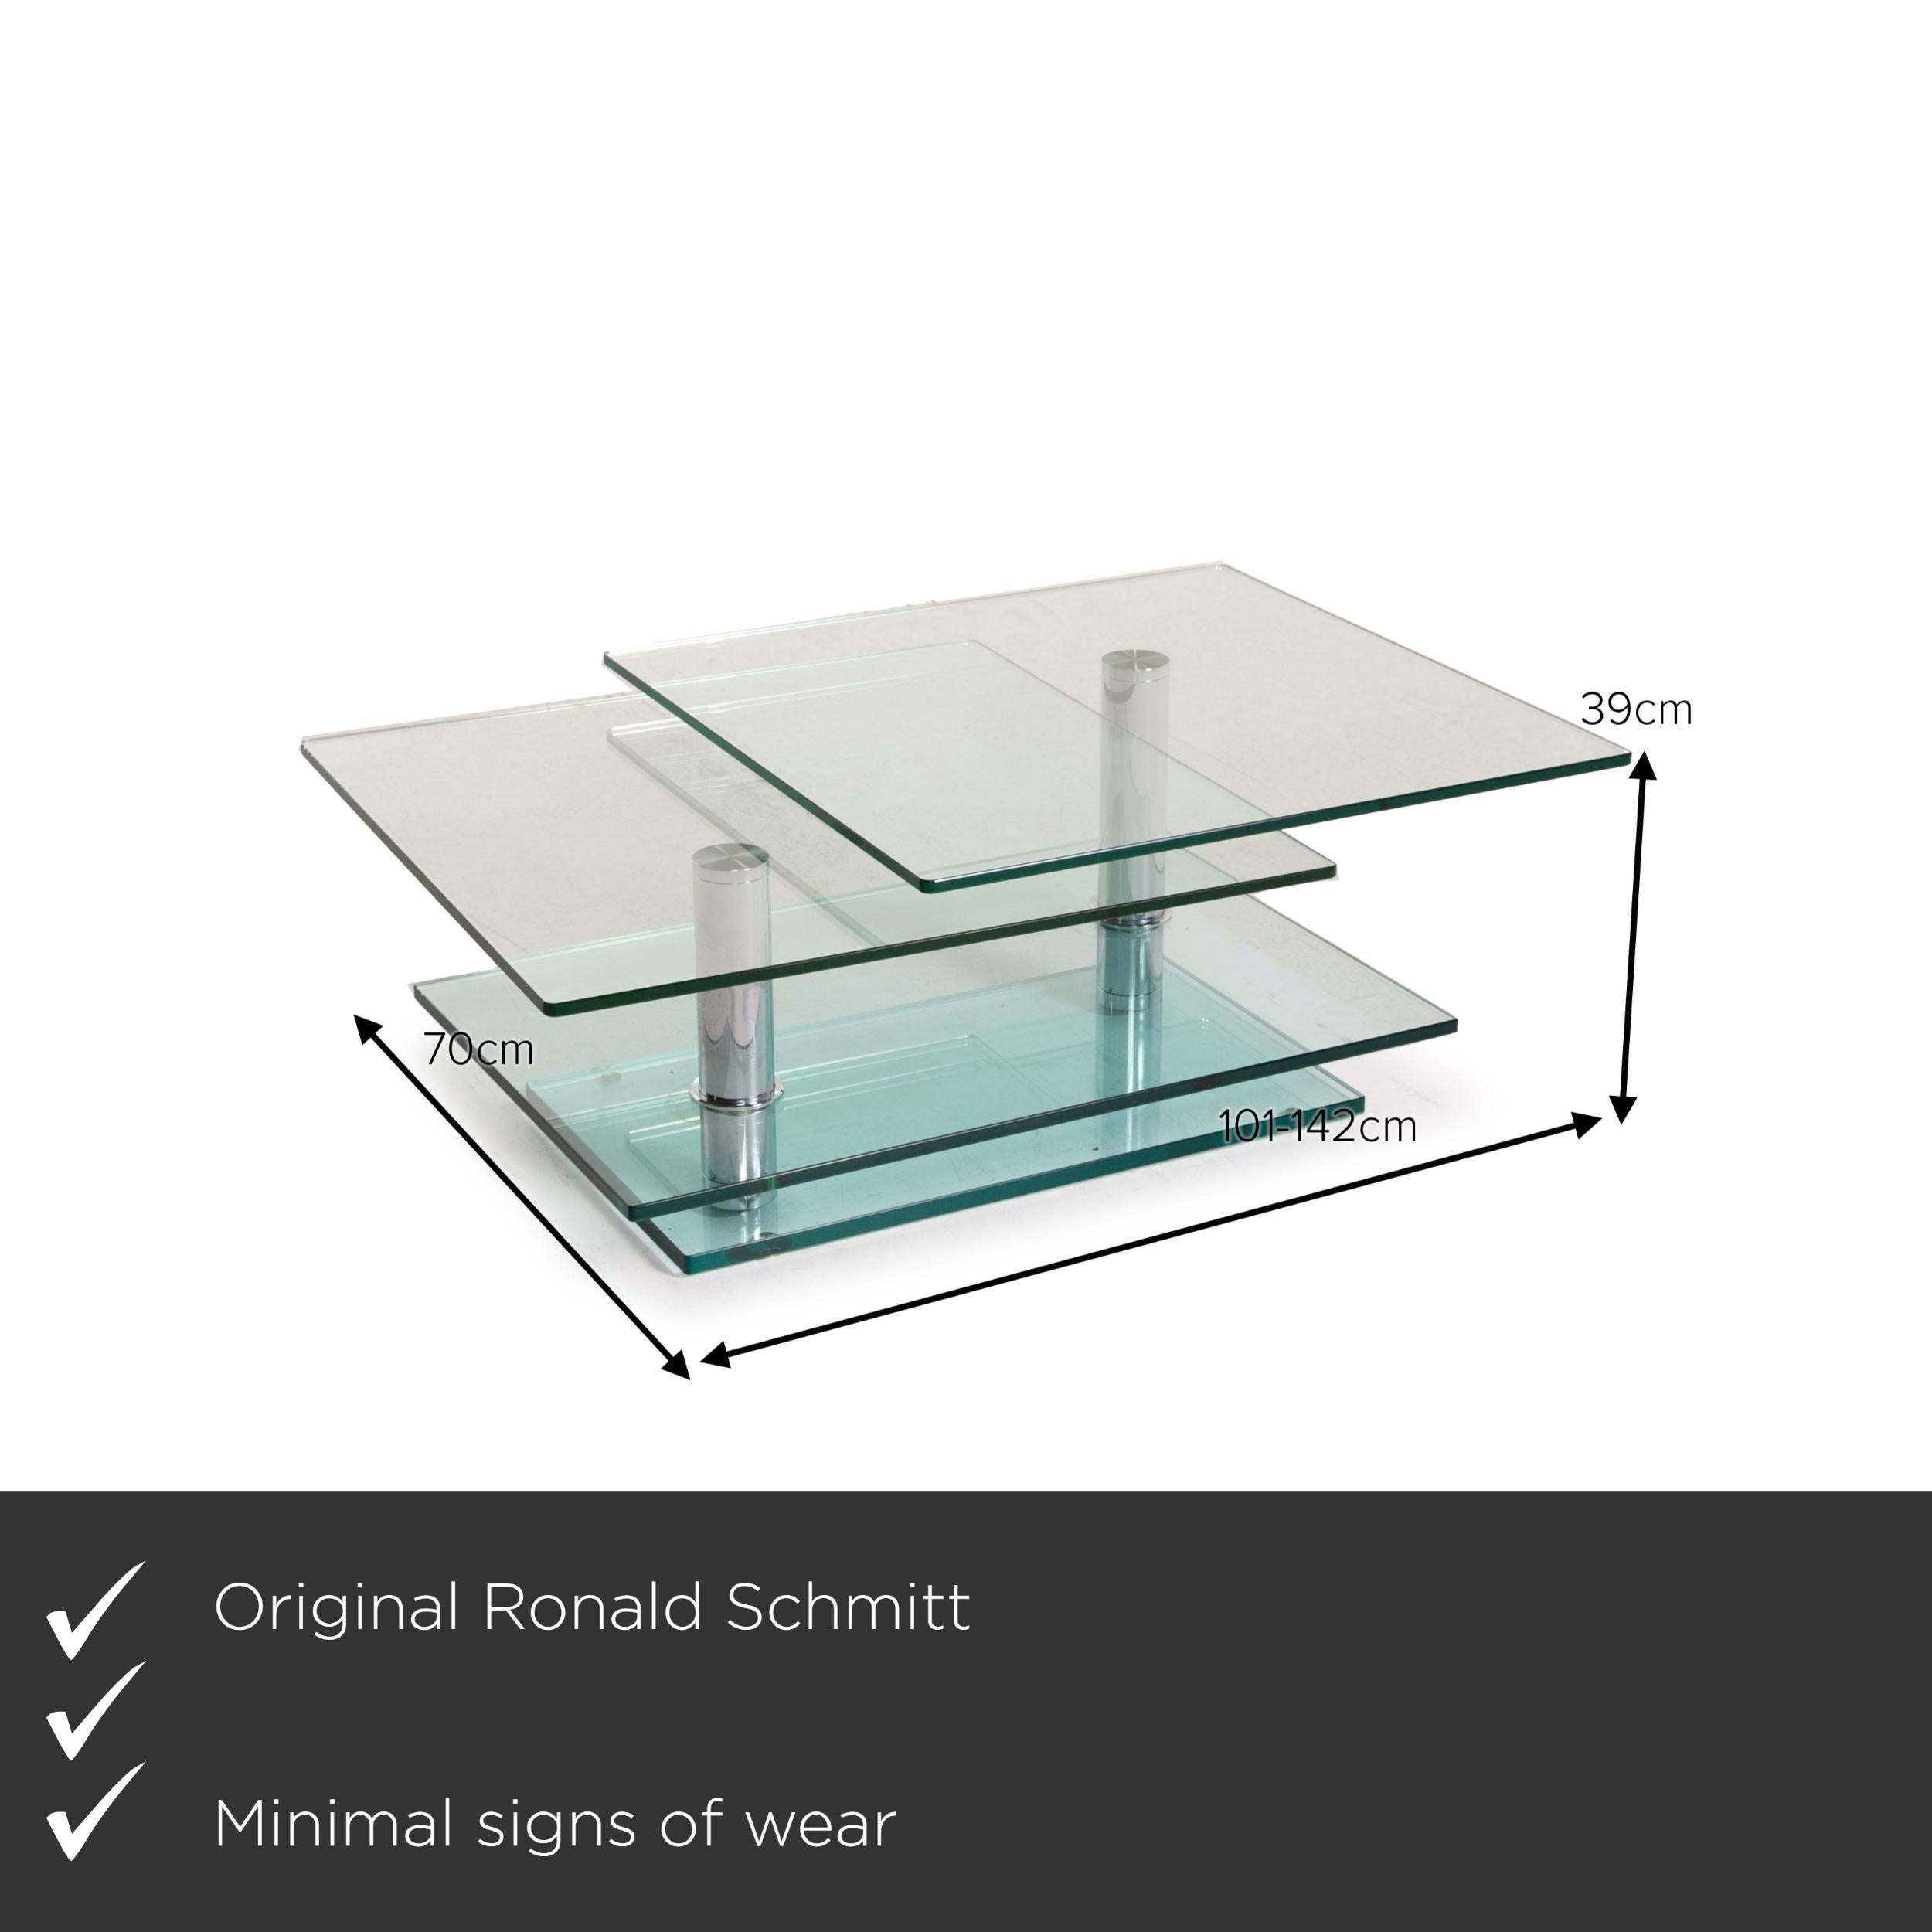 We present to you a Ronald Schmitt K500 glass table coffee table chrome function.


 Product measurements in centimeters:
 

Depth: 70
Width: 101
 Height: 39.





 